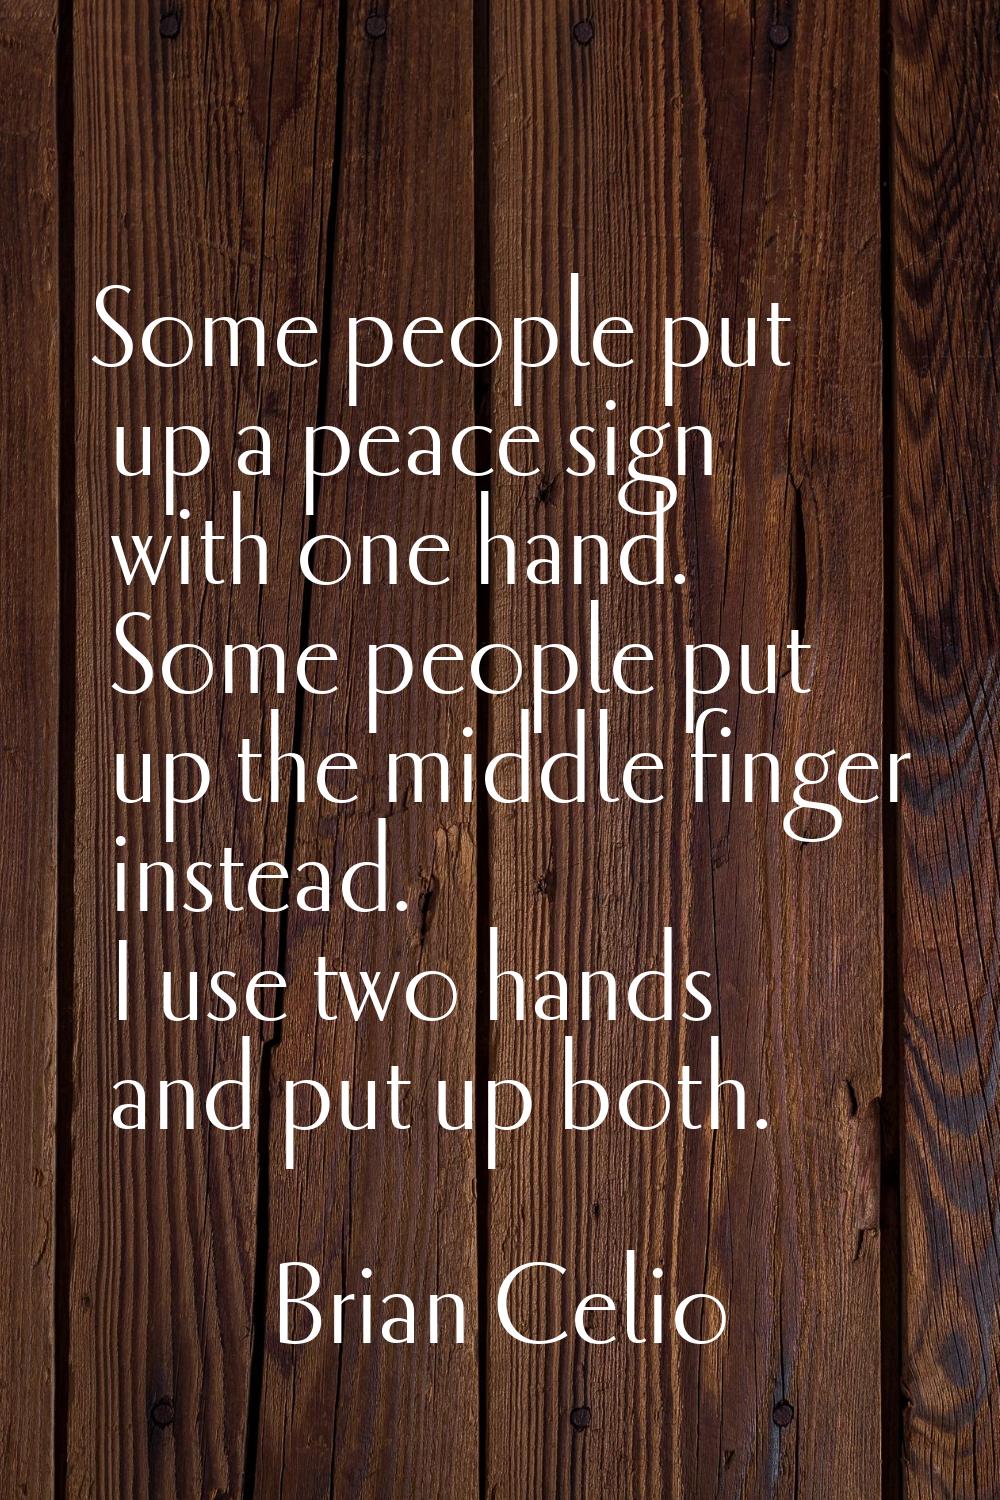 Some people put up a peace sign with one hand. Some people put up the middle finger instead. I use 